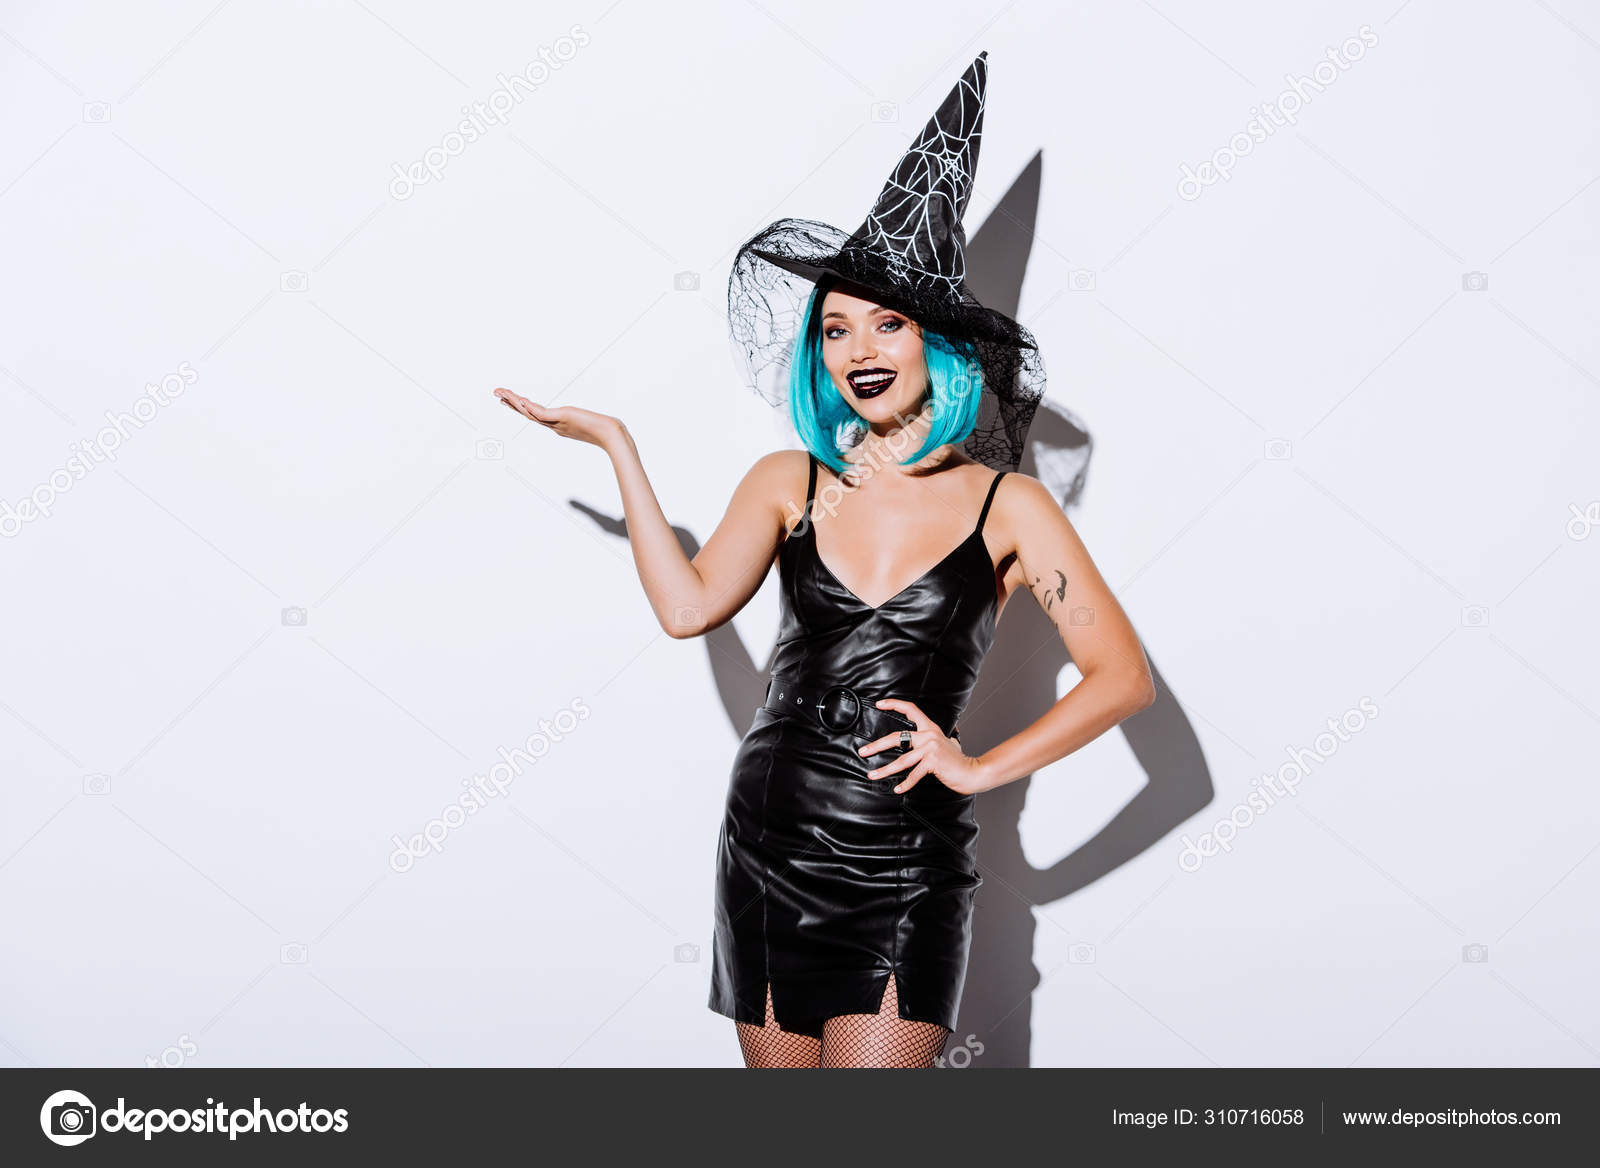 1. "Blue Haired Witch Halloween Costume" - wide 1